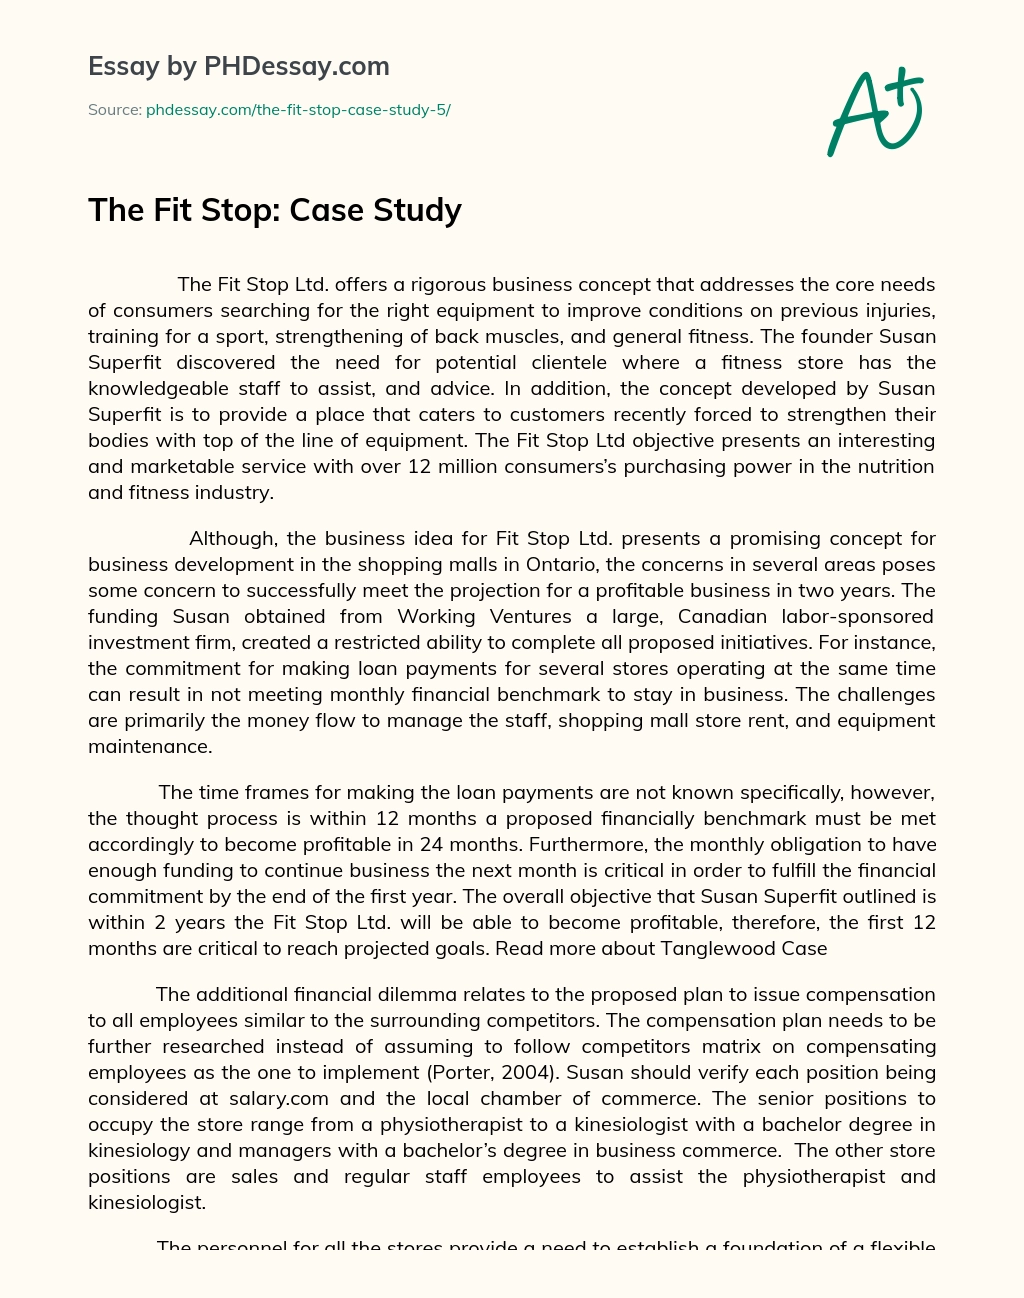 The Fit Stop: Case Study essay